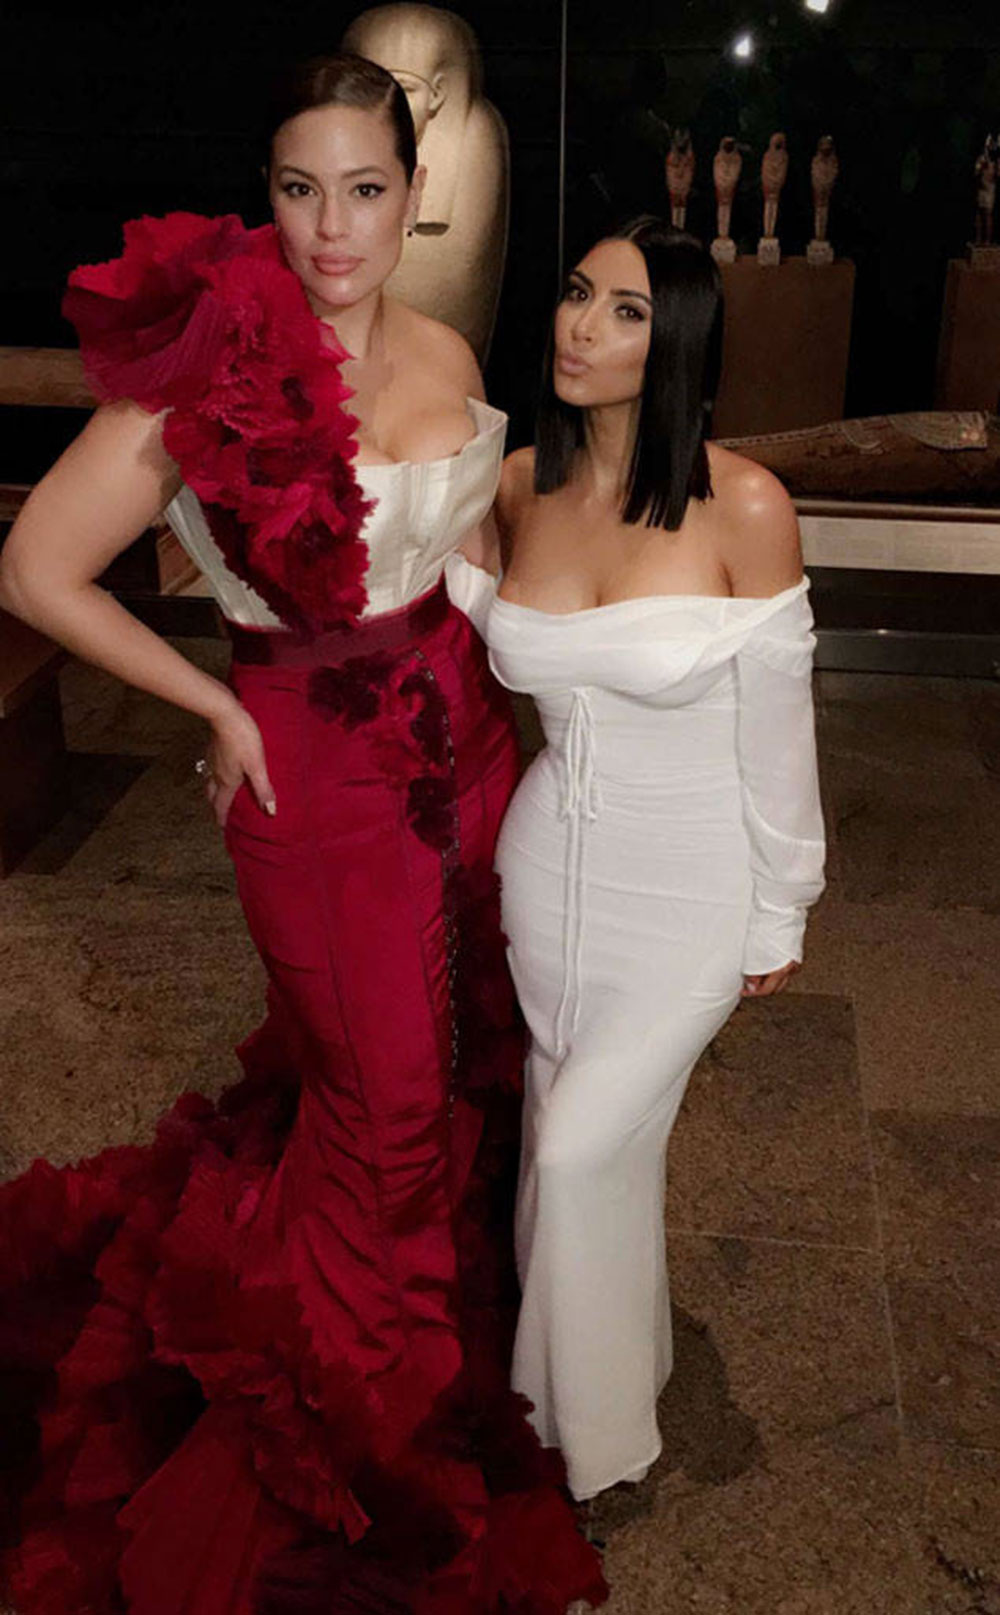 Kim also posed with model Ashley Graham.